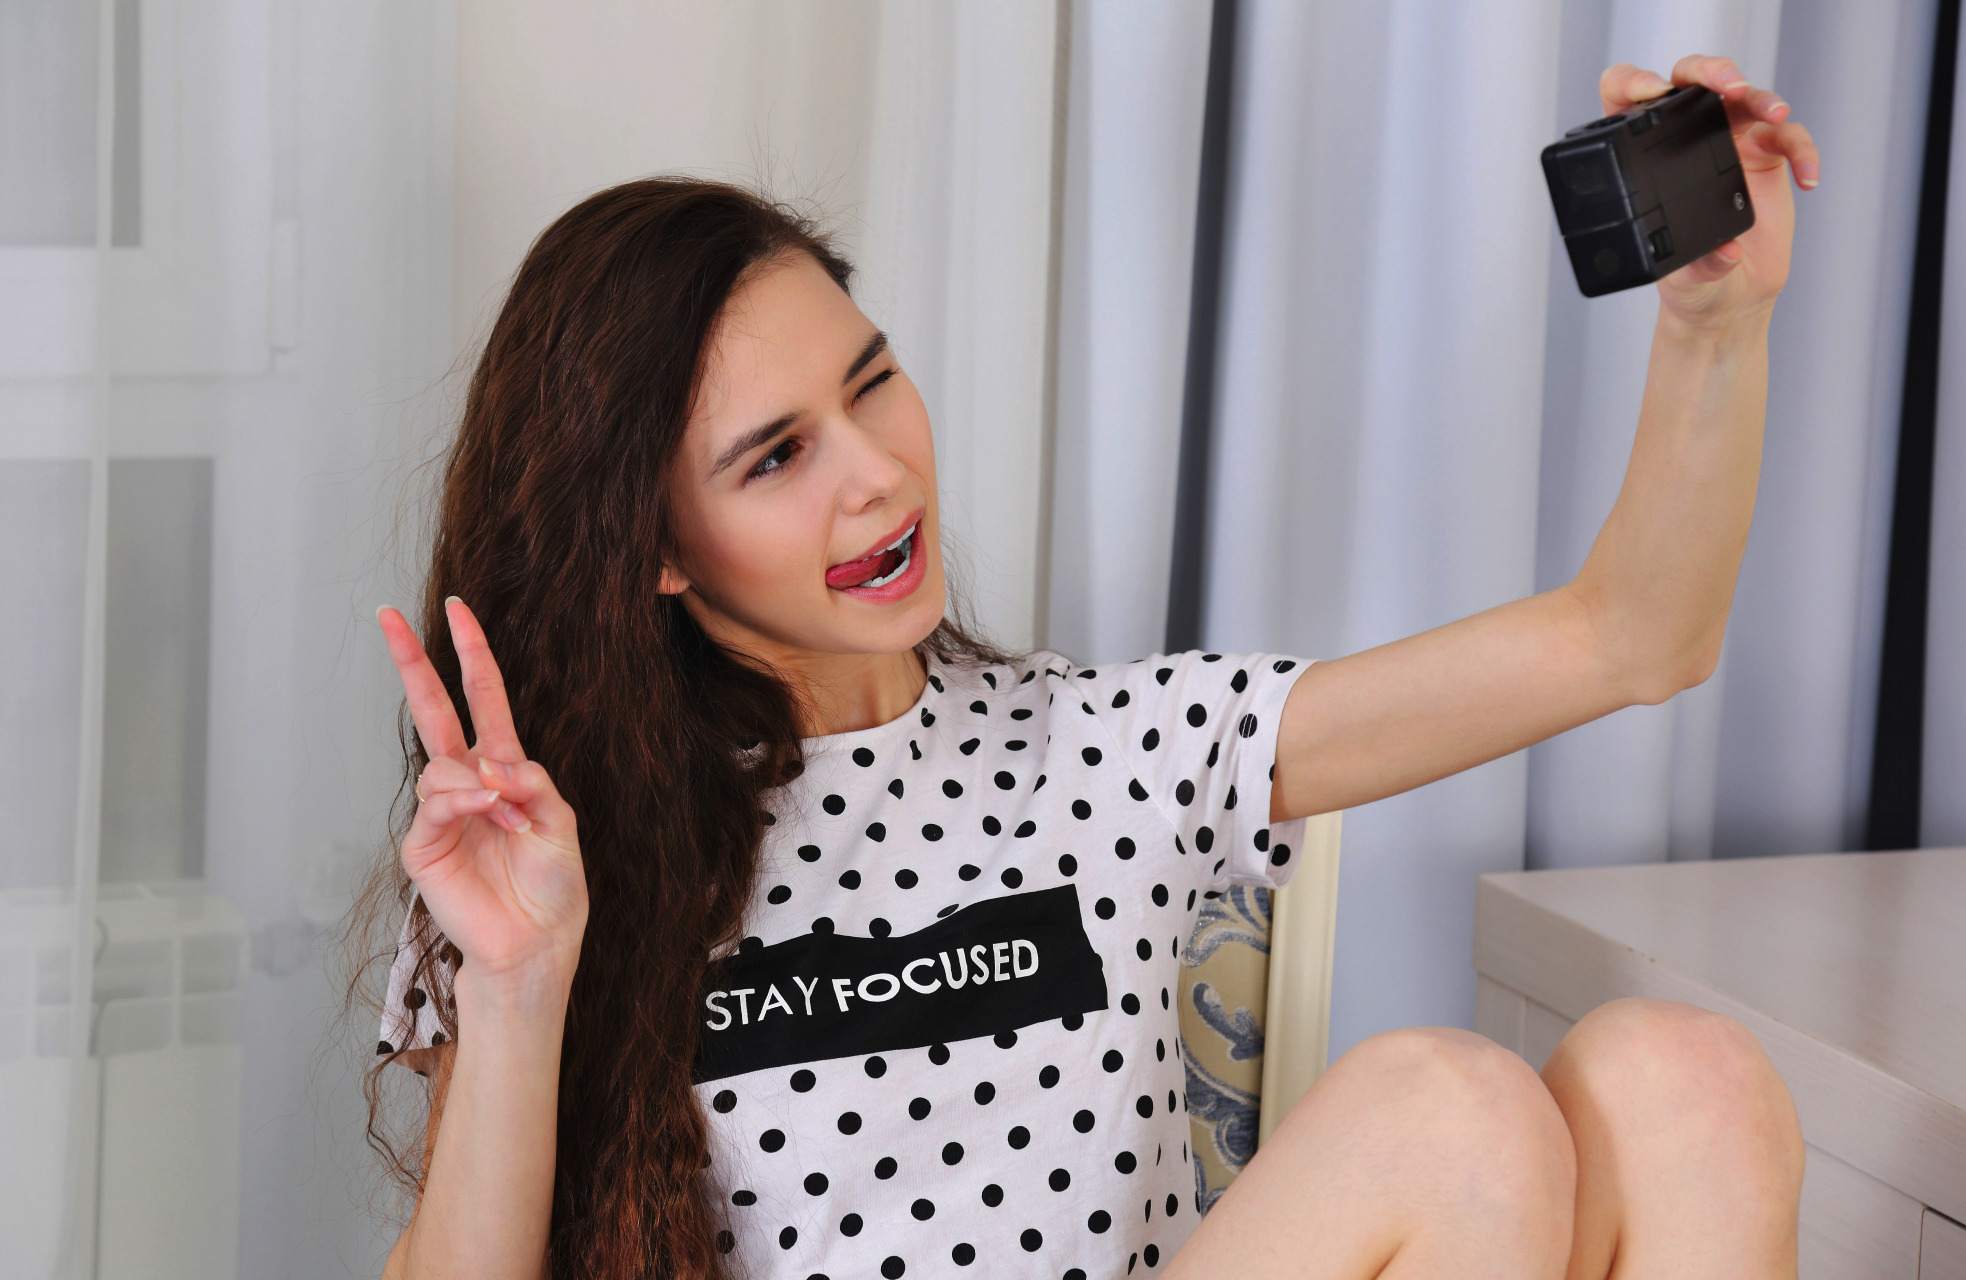 People 1966x1280 model tongue out women photography camera pink lipstick long hair brunette white t-shirt indoors knees together T-shirt women indoors Leona Mia selfies